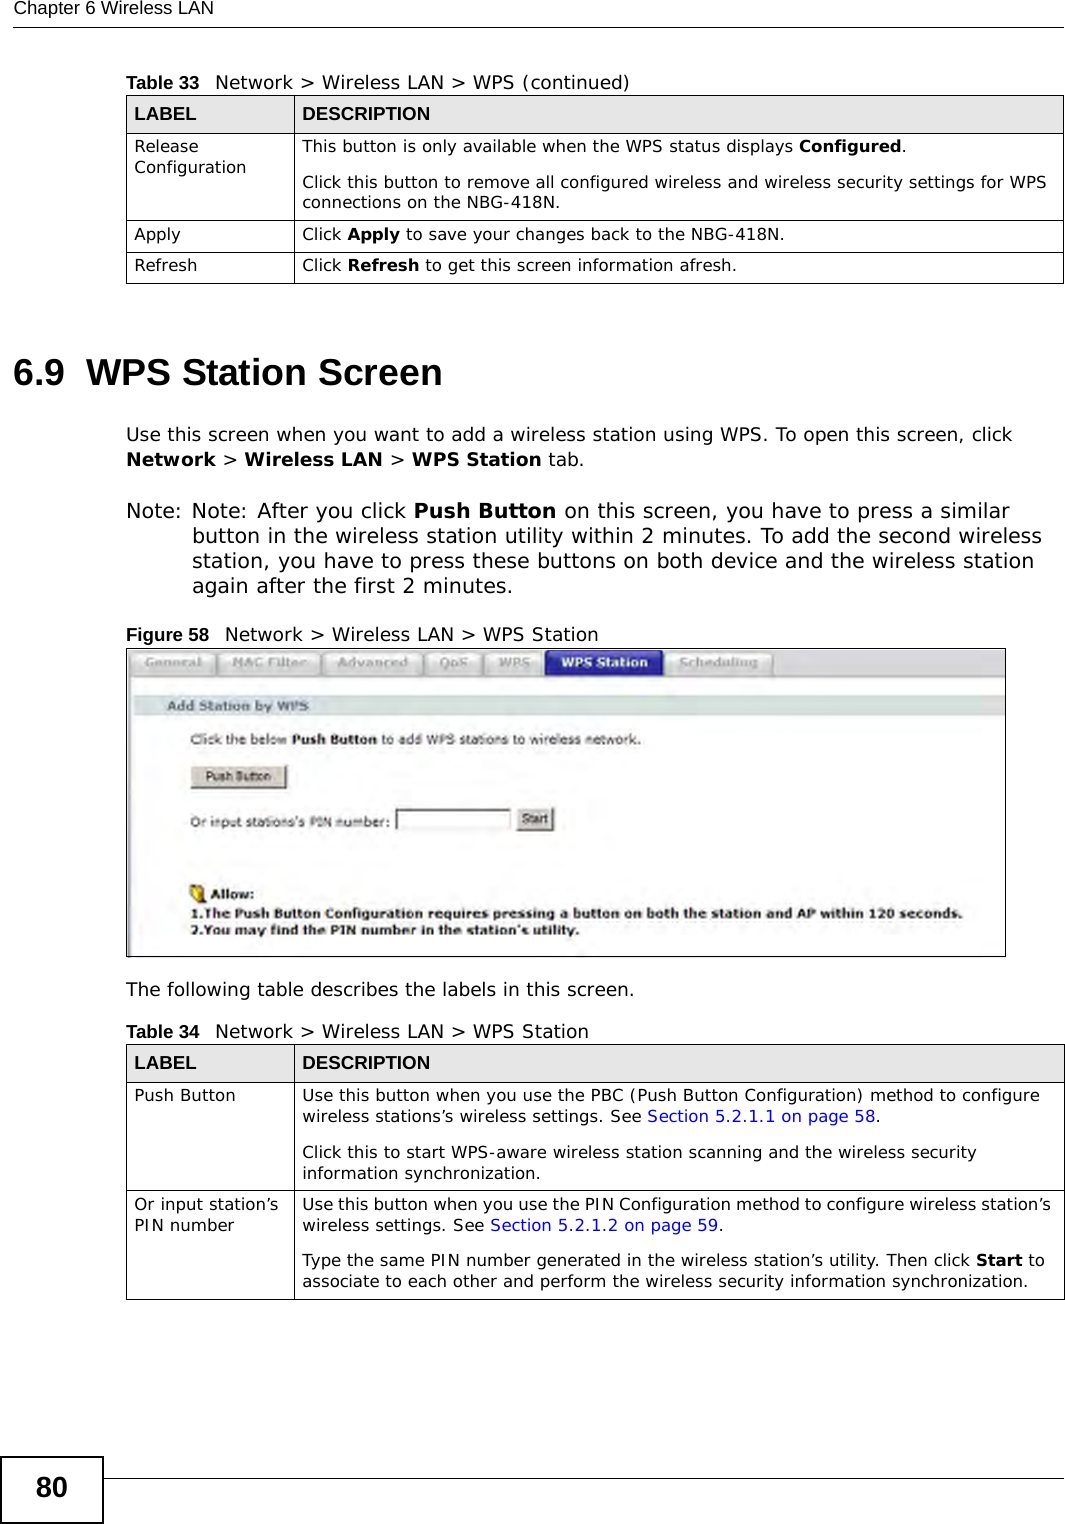 Chapter 6 Wireless LAN806.9  WPS Station ScreenUse this screen when you want to add a wireless station using WPS. To open this screen, click Network &gt; Wireless LAN &gt; WPS Station tab.Note: Note: After you click Push Button on this screen, you have to press a similar button in the wireless station utility within 2 minutes. To add the second wireless station, you have to press these buttons on both device and the wireless station again after the first 2 minutes.Figure 58   Network &gt; Wireless LAN &gt; WPS StationThe following table describes the labels in this screen.Release Configuration This button is only available when the WPS status displays Configured.Click this button to remove all configured wireless and wireless security settings for WPS connections on the NBG-418N.Apply Click Apply to save your changes back to the NBG-418N.Refresh Click Refresh to get this screen information afresh.Table 33   Network &gt; Wireless LAN &gt; WPS (continued)LABEL DESCRIPTIONTable 34   Network &gt; Wireless LAN &gt; WPS StationLABEL DESCRIPTIONPush Button Use this button when you use the PBC (Push Button Configuration) method to configure wireless stations’s wireless settings. See Section 5.2.1.1 on page 58.Click this to start WPS-aware wireless station scanning and the wireless security information synchronization. Or input station’s PIN number Use this button when you use the PIN Configuration method to configure wireless station’s wireless settings. See Section 5.2.1.2 on page 59.Type the same PIN number generated in the wireless station’s utility. Then click Start to associate to each other and perform the wireless security information synchronization. 